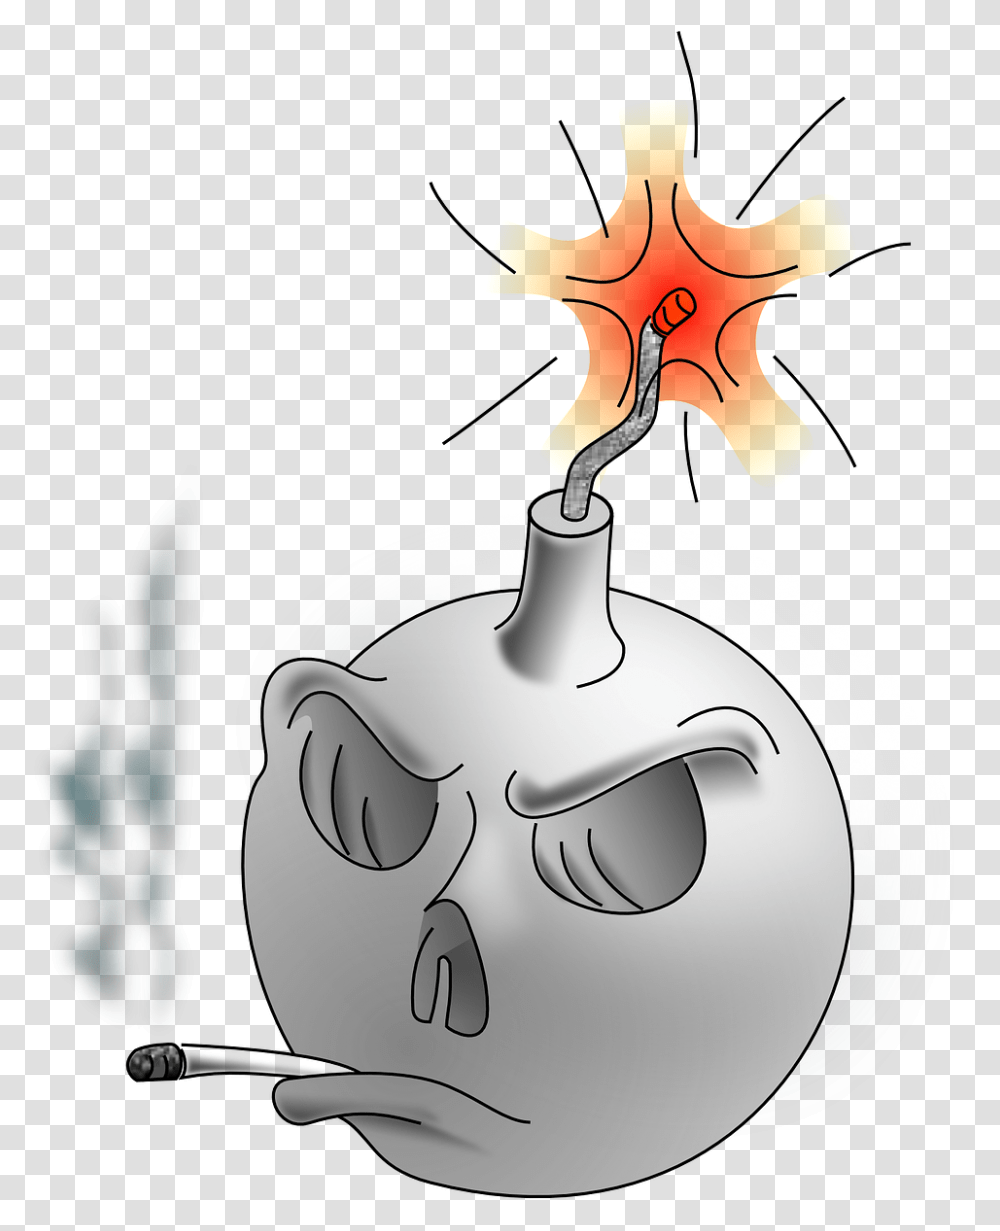 Smoking Bomb, Weapon, Weaponry, Armor, Sweets Transparent Png